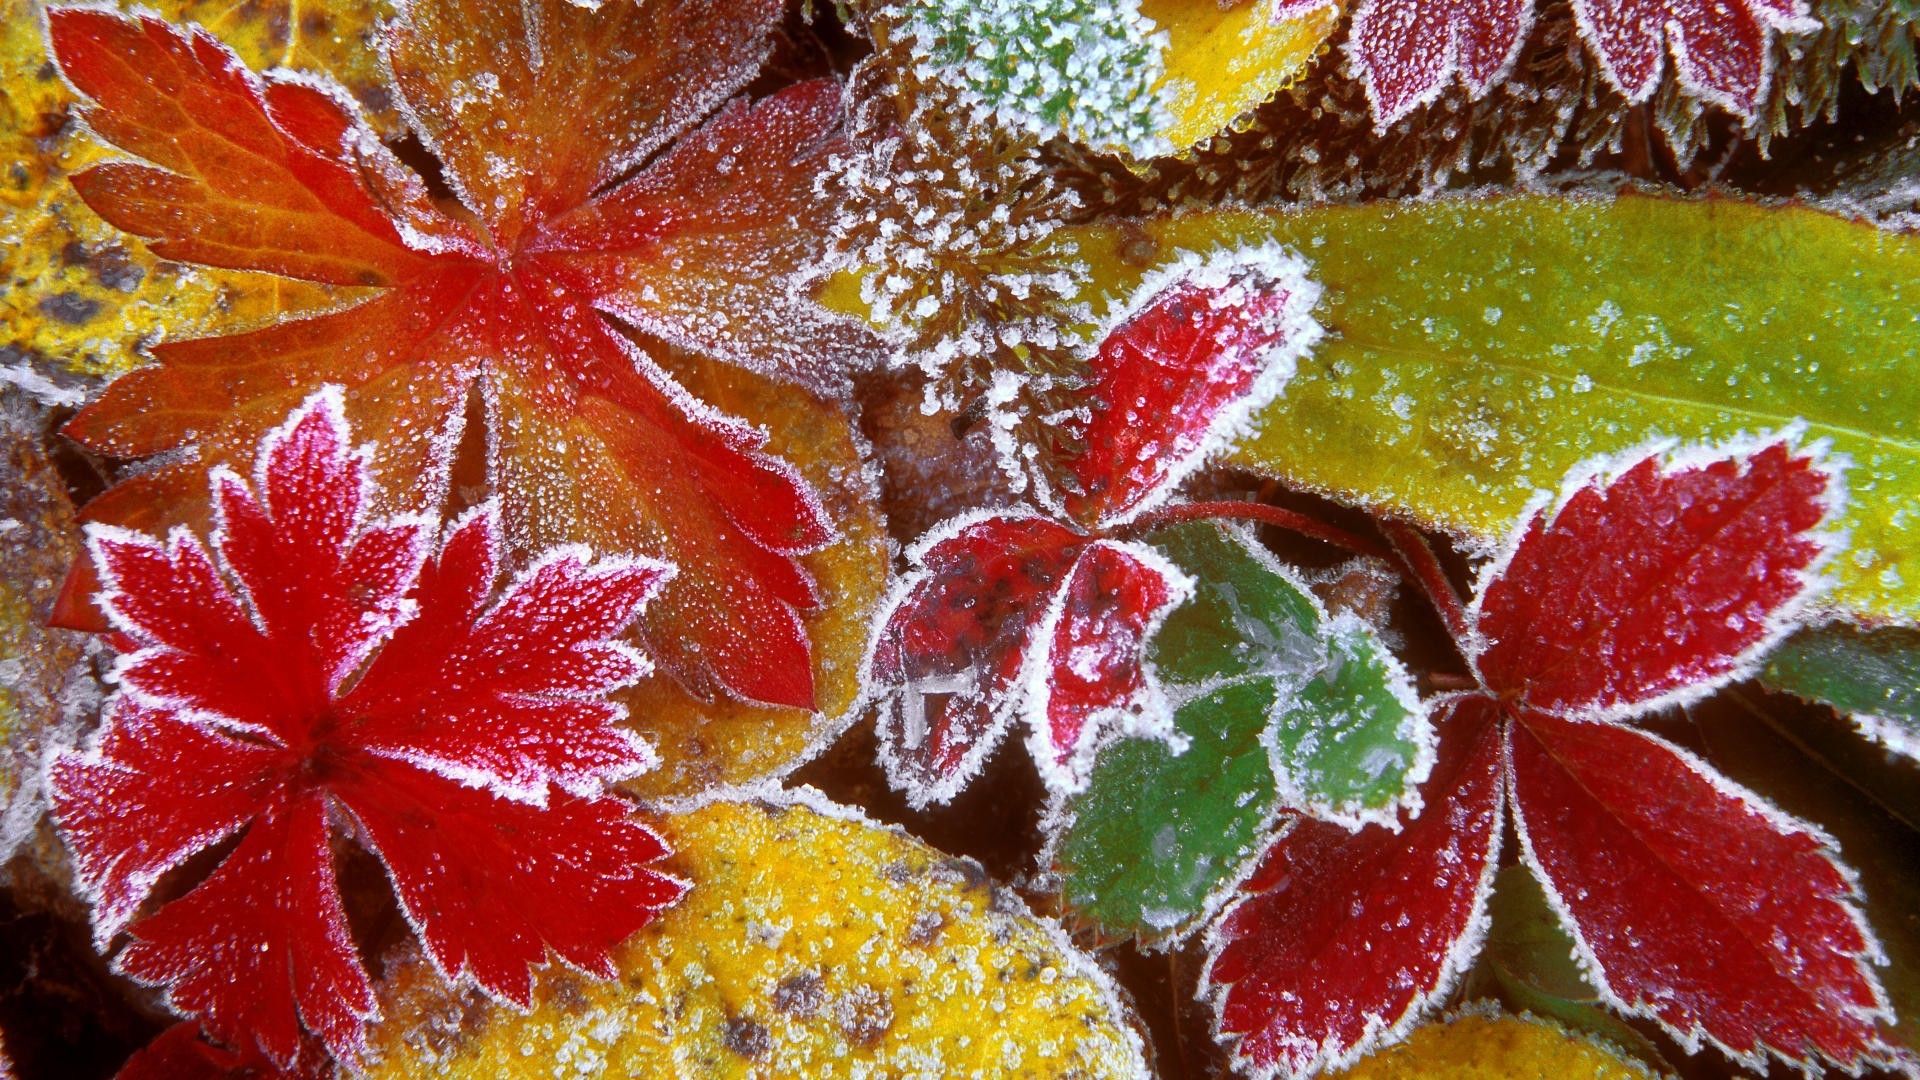 Forest leaves frosty wallpaper. Autumn leaves wallpaper, Leaf wallpaper, Desktop wallpaper fall